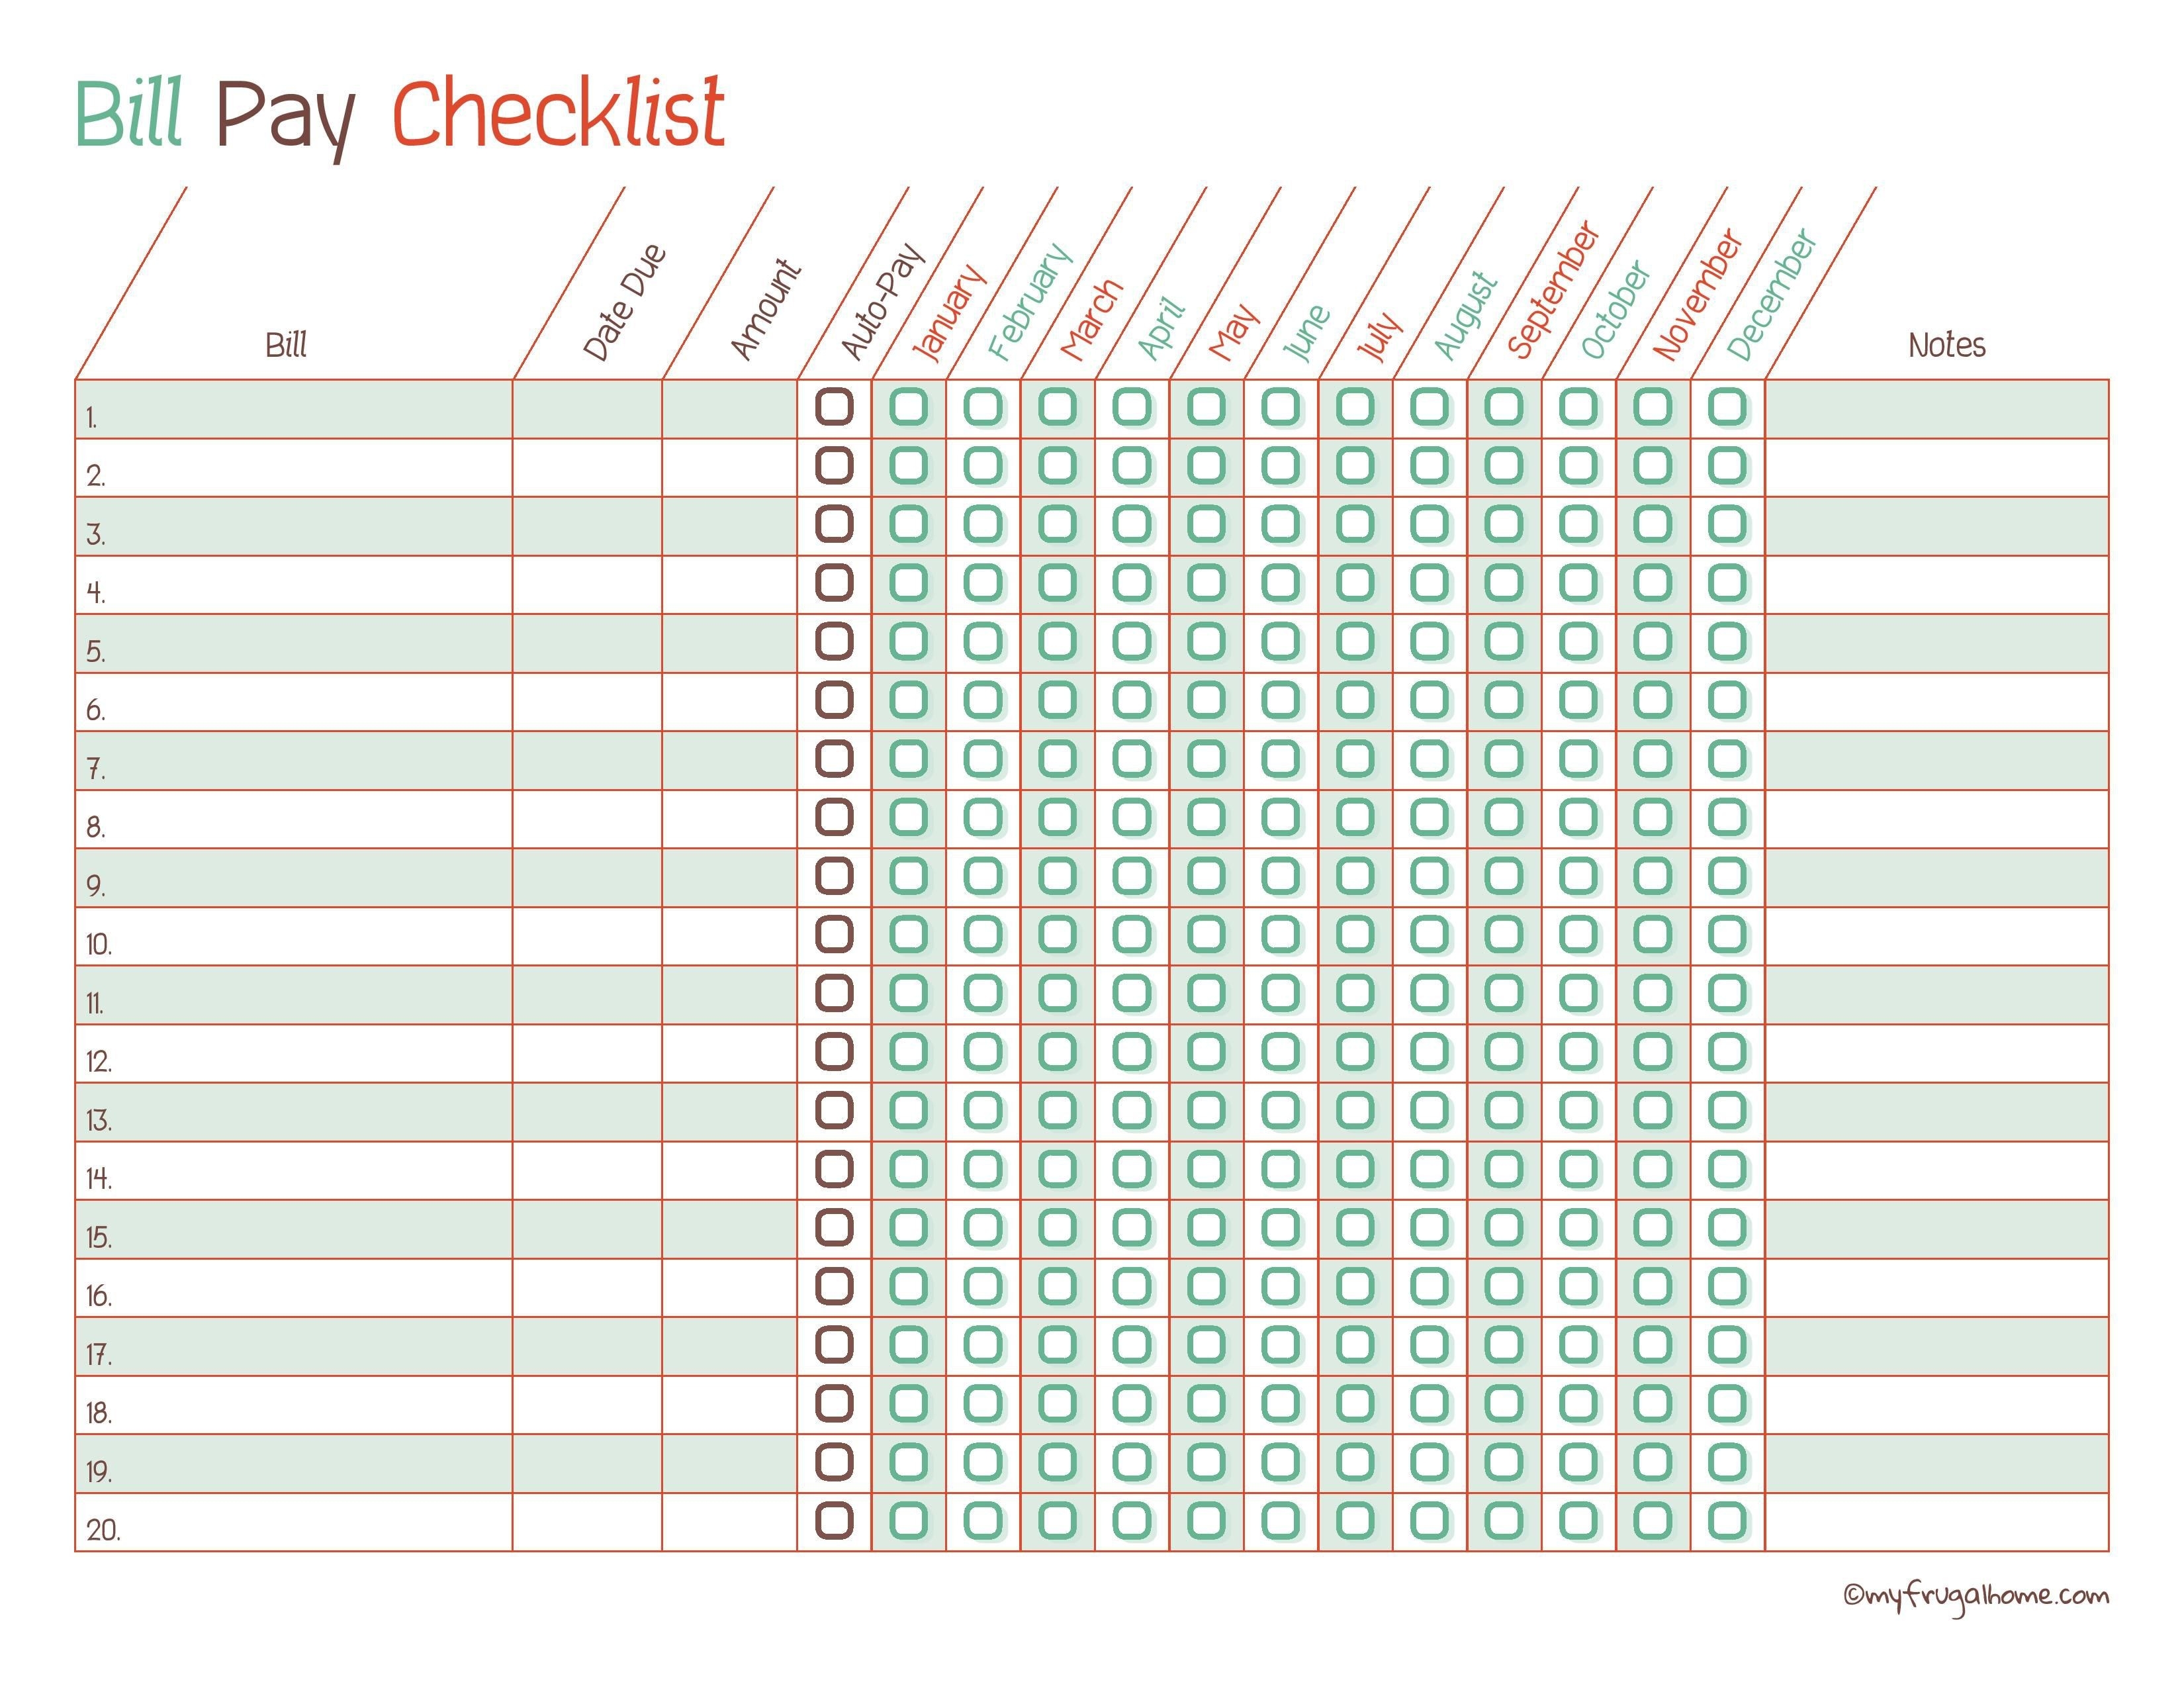 Blank Printable Monthly Bill Pay Worksheet by oyungurup.com